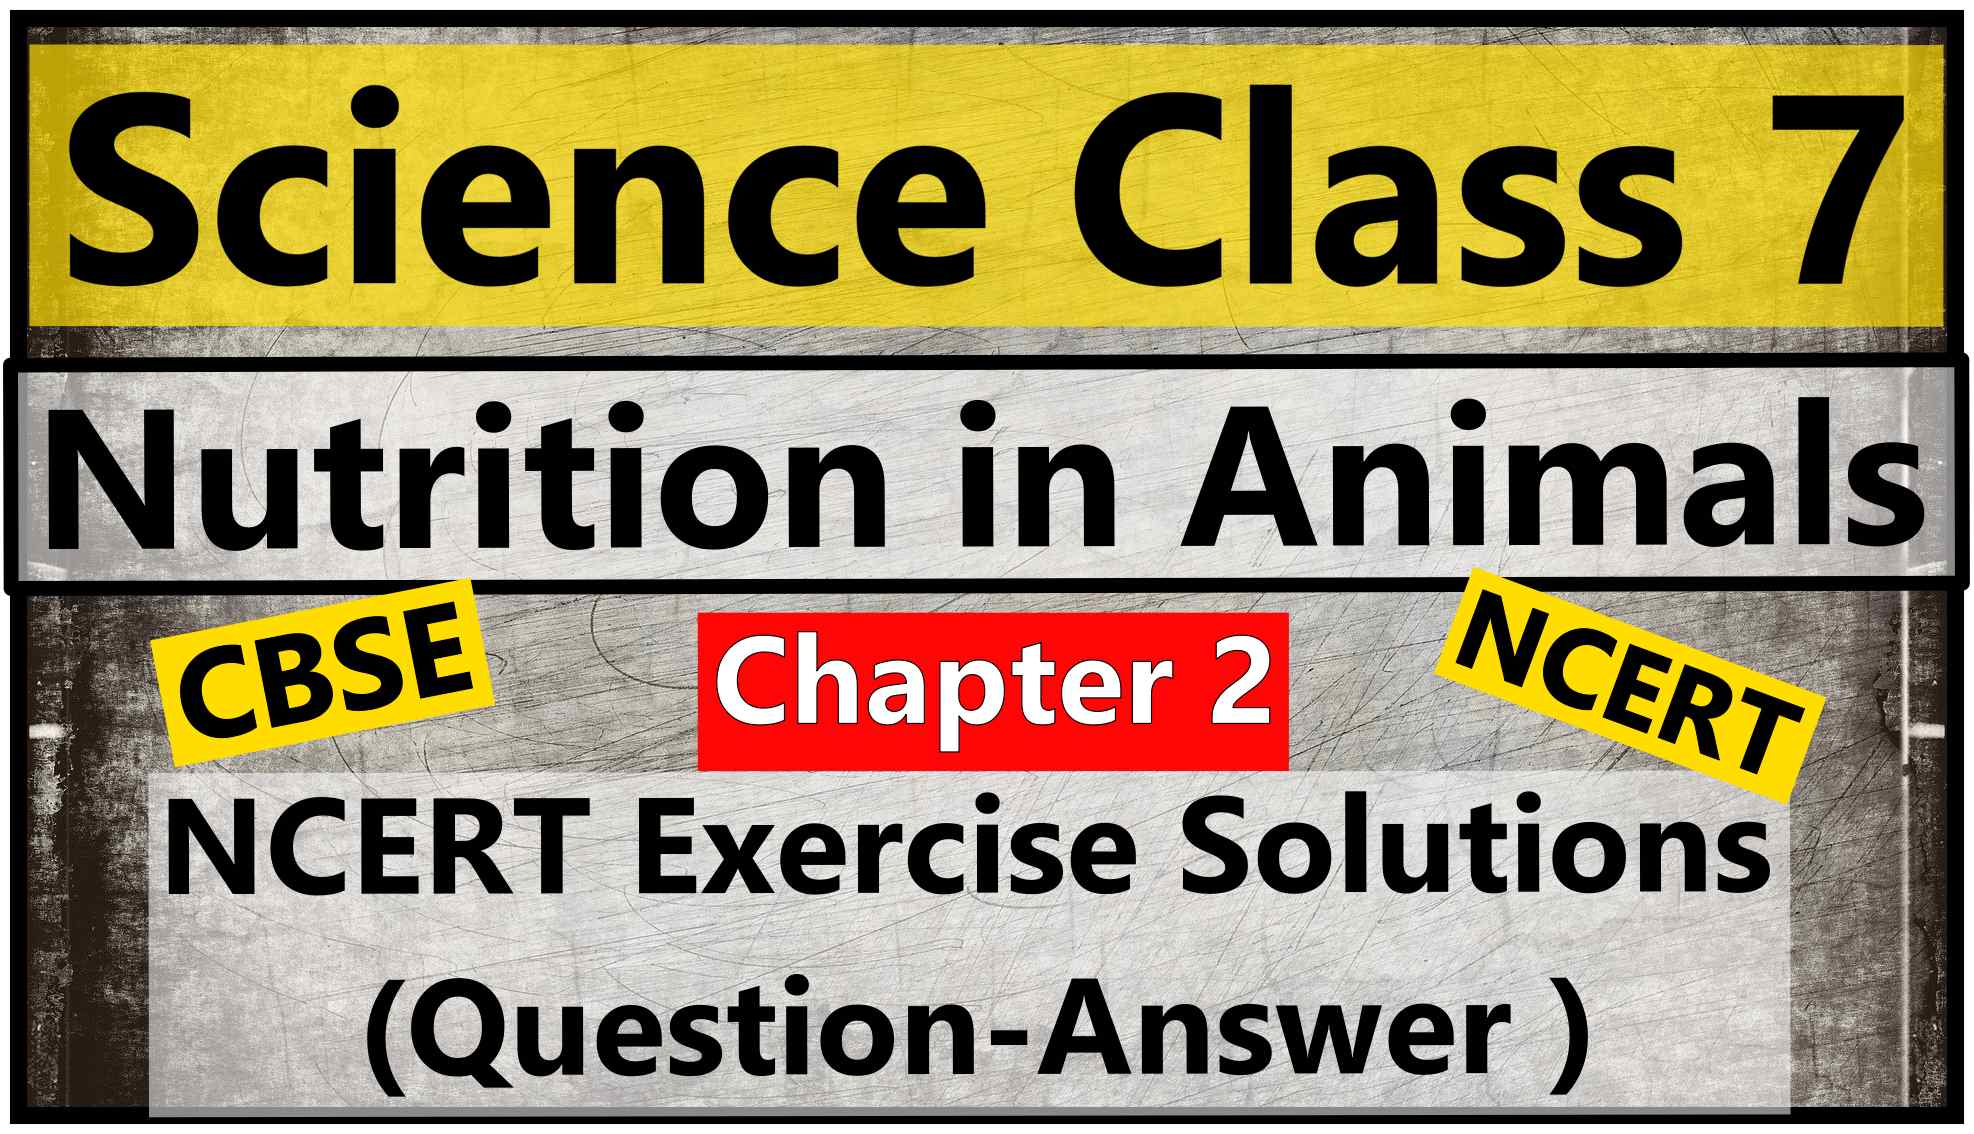 Science Class 7 – Chapter 2 – Nutrition in Animals – NCERT Exercise Solutions ( Question-Answer )